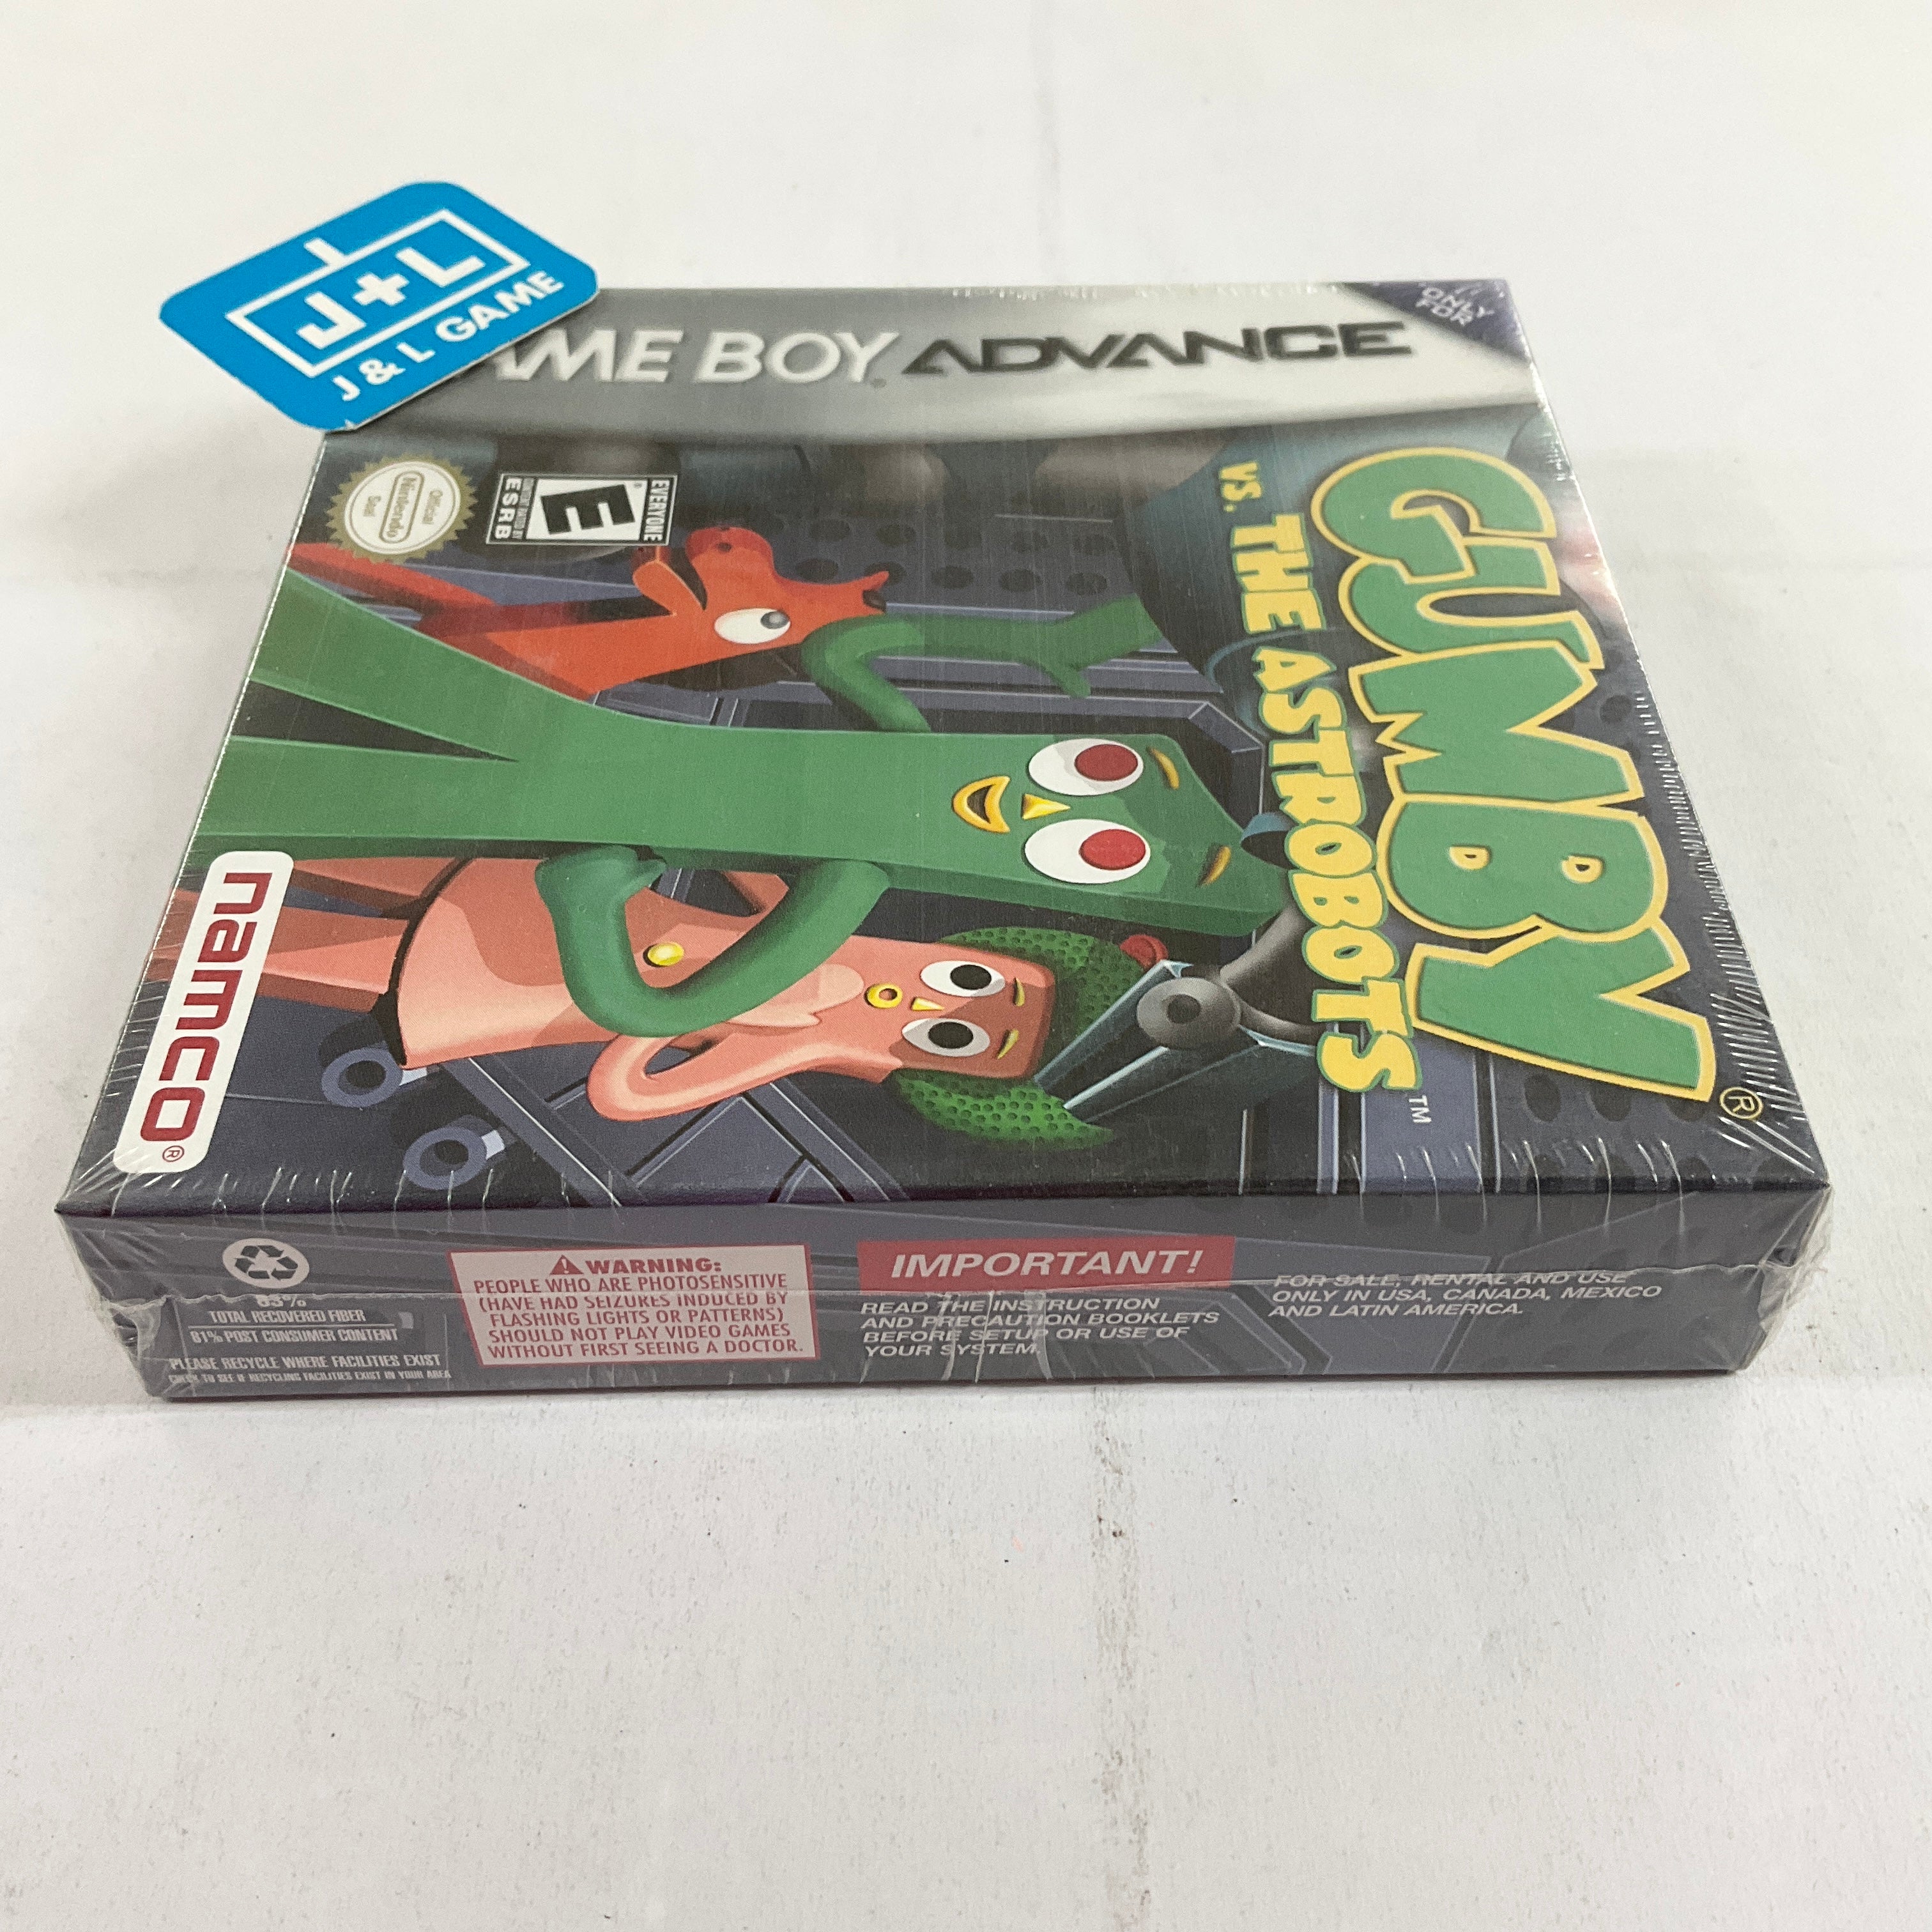 Gumby vs. the Astrobots - (GBA) Game Boy Advance Video Games Namco   